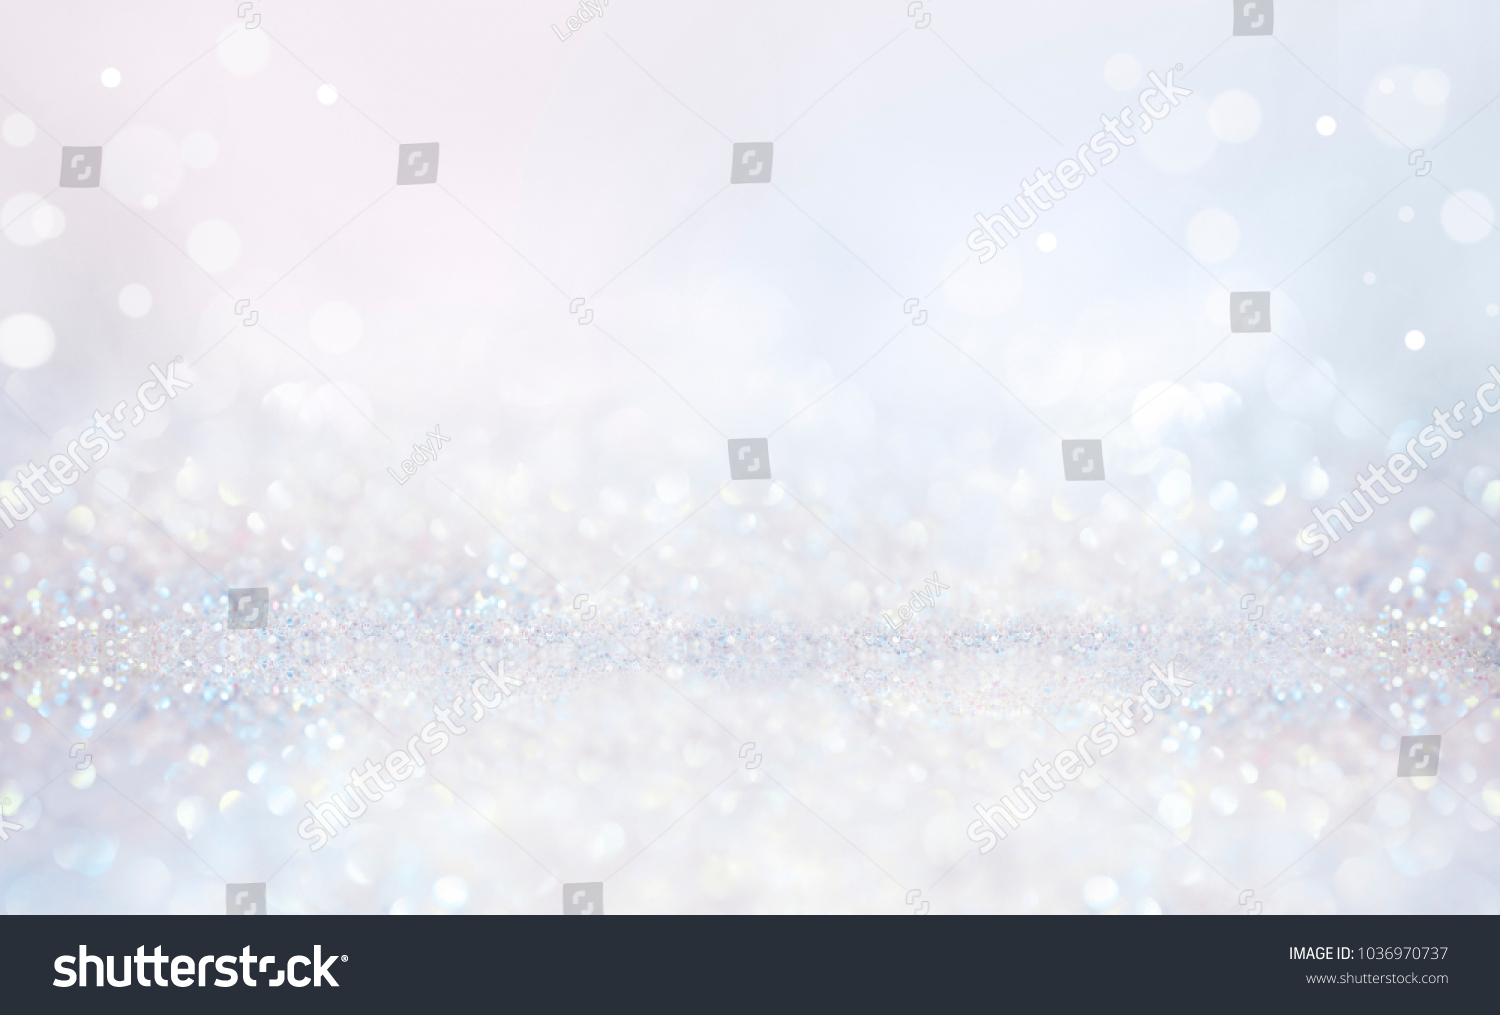 Glitter christmas background in pastel delicate silver and white tones de-focused. #1036970737